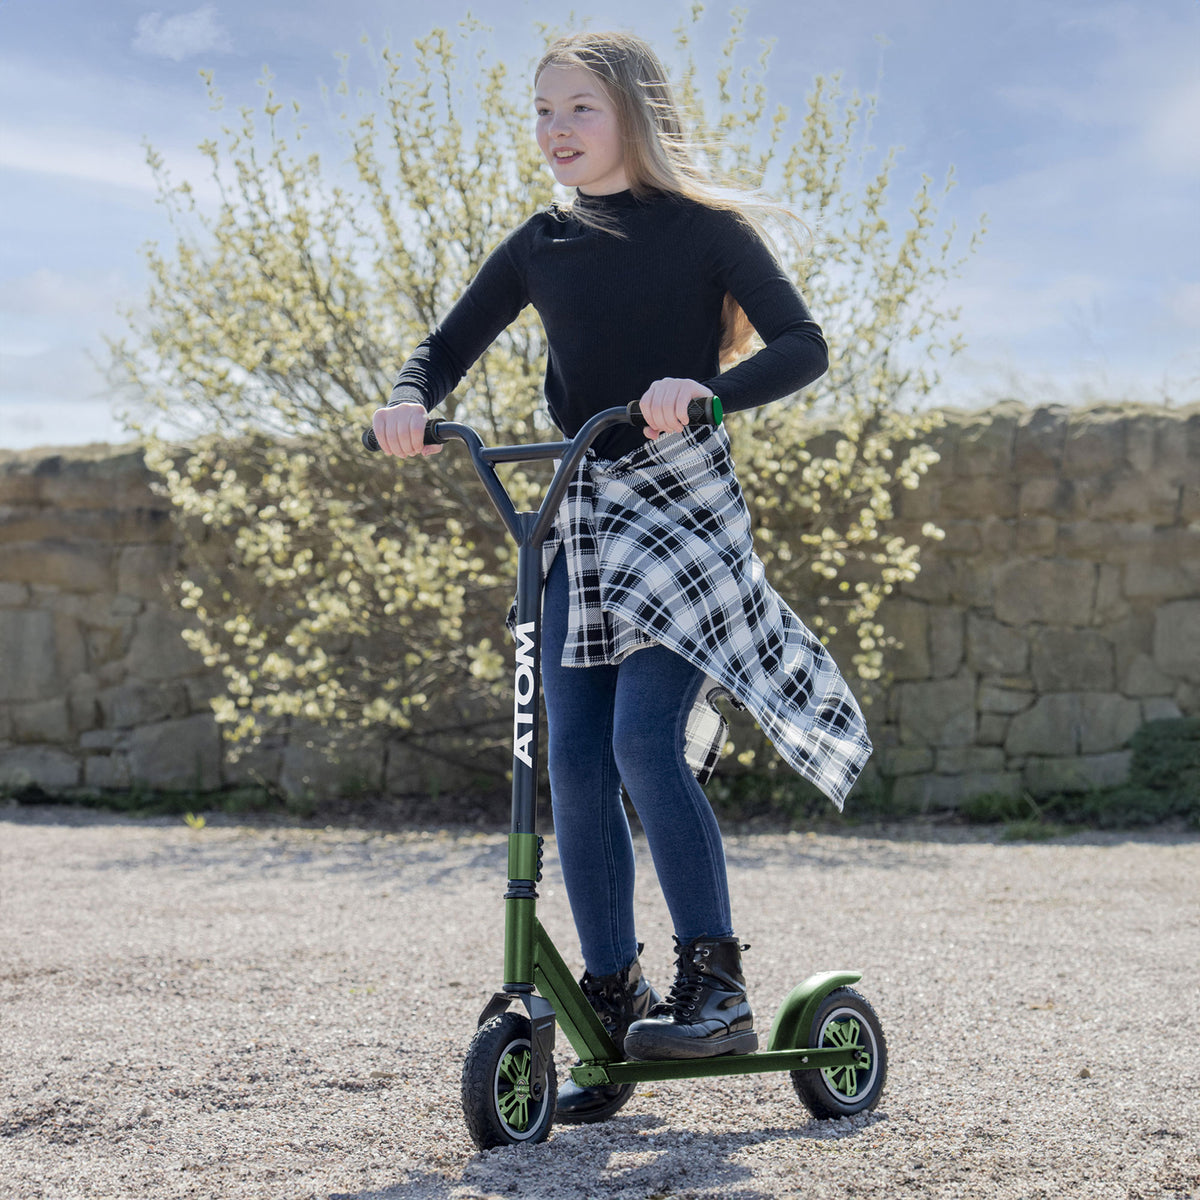 ATOM Dirt Rider Scooter in Green, durable off-road scooter designed for rugged terrains and adventurous rides